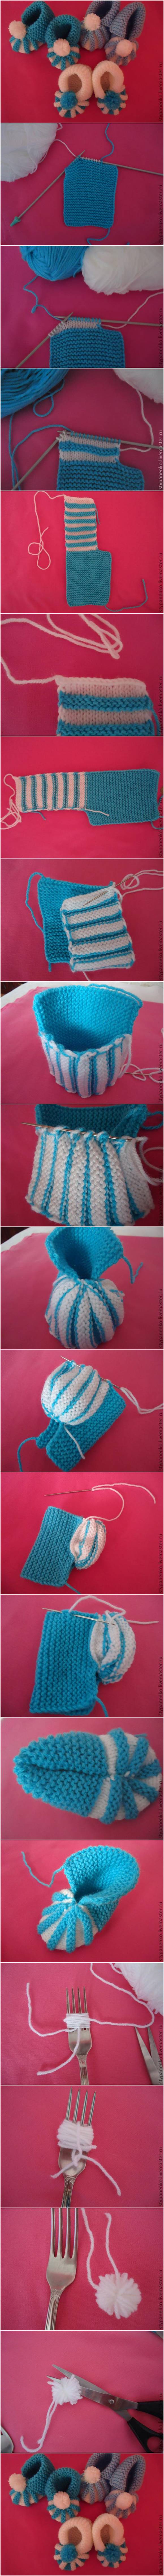 How to DIY Cute Pom-pom Decorated Knitted Baby Booties